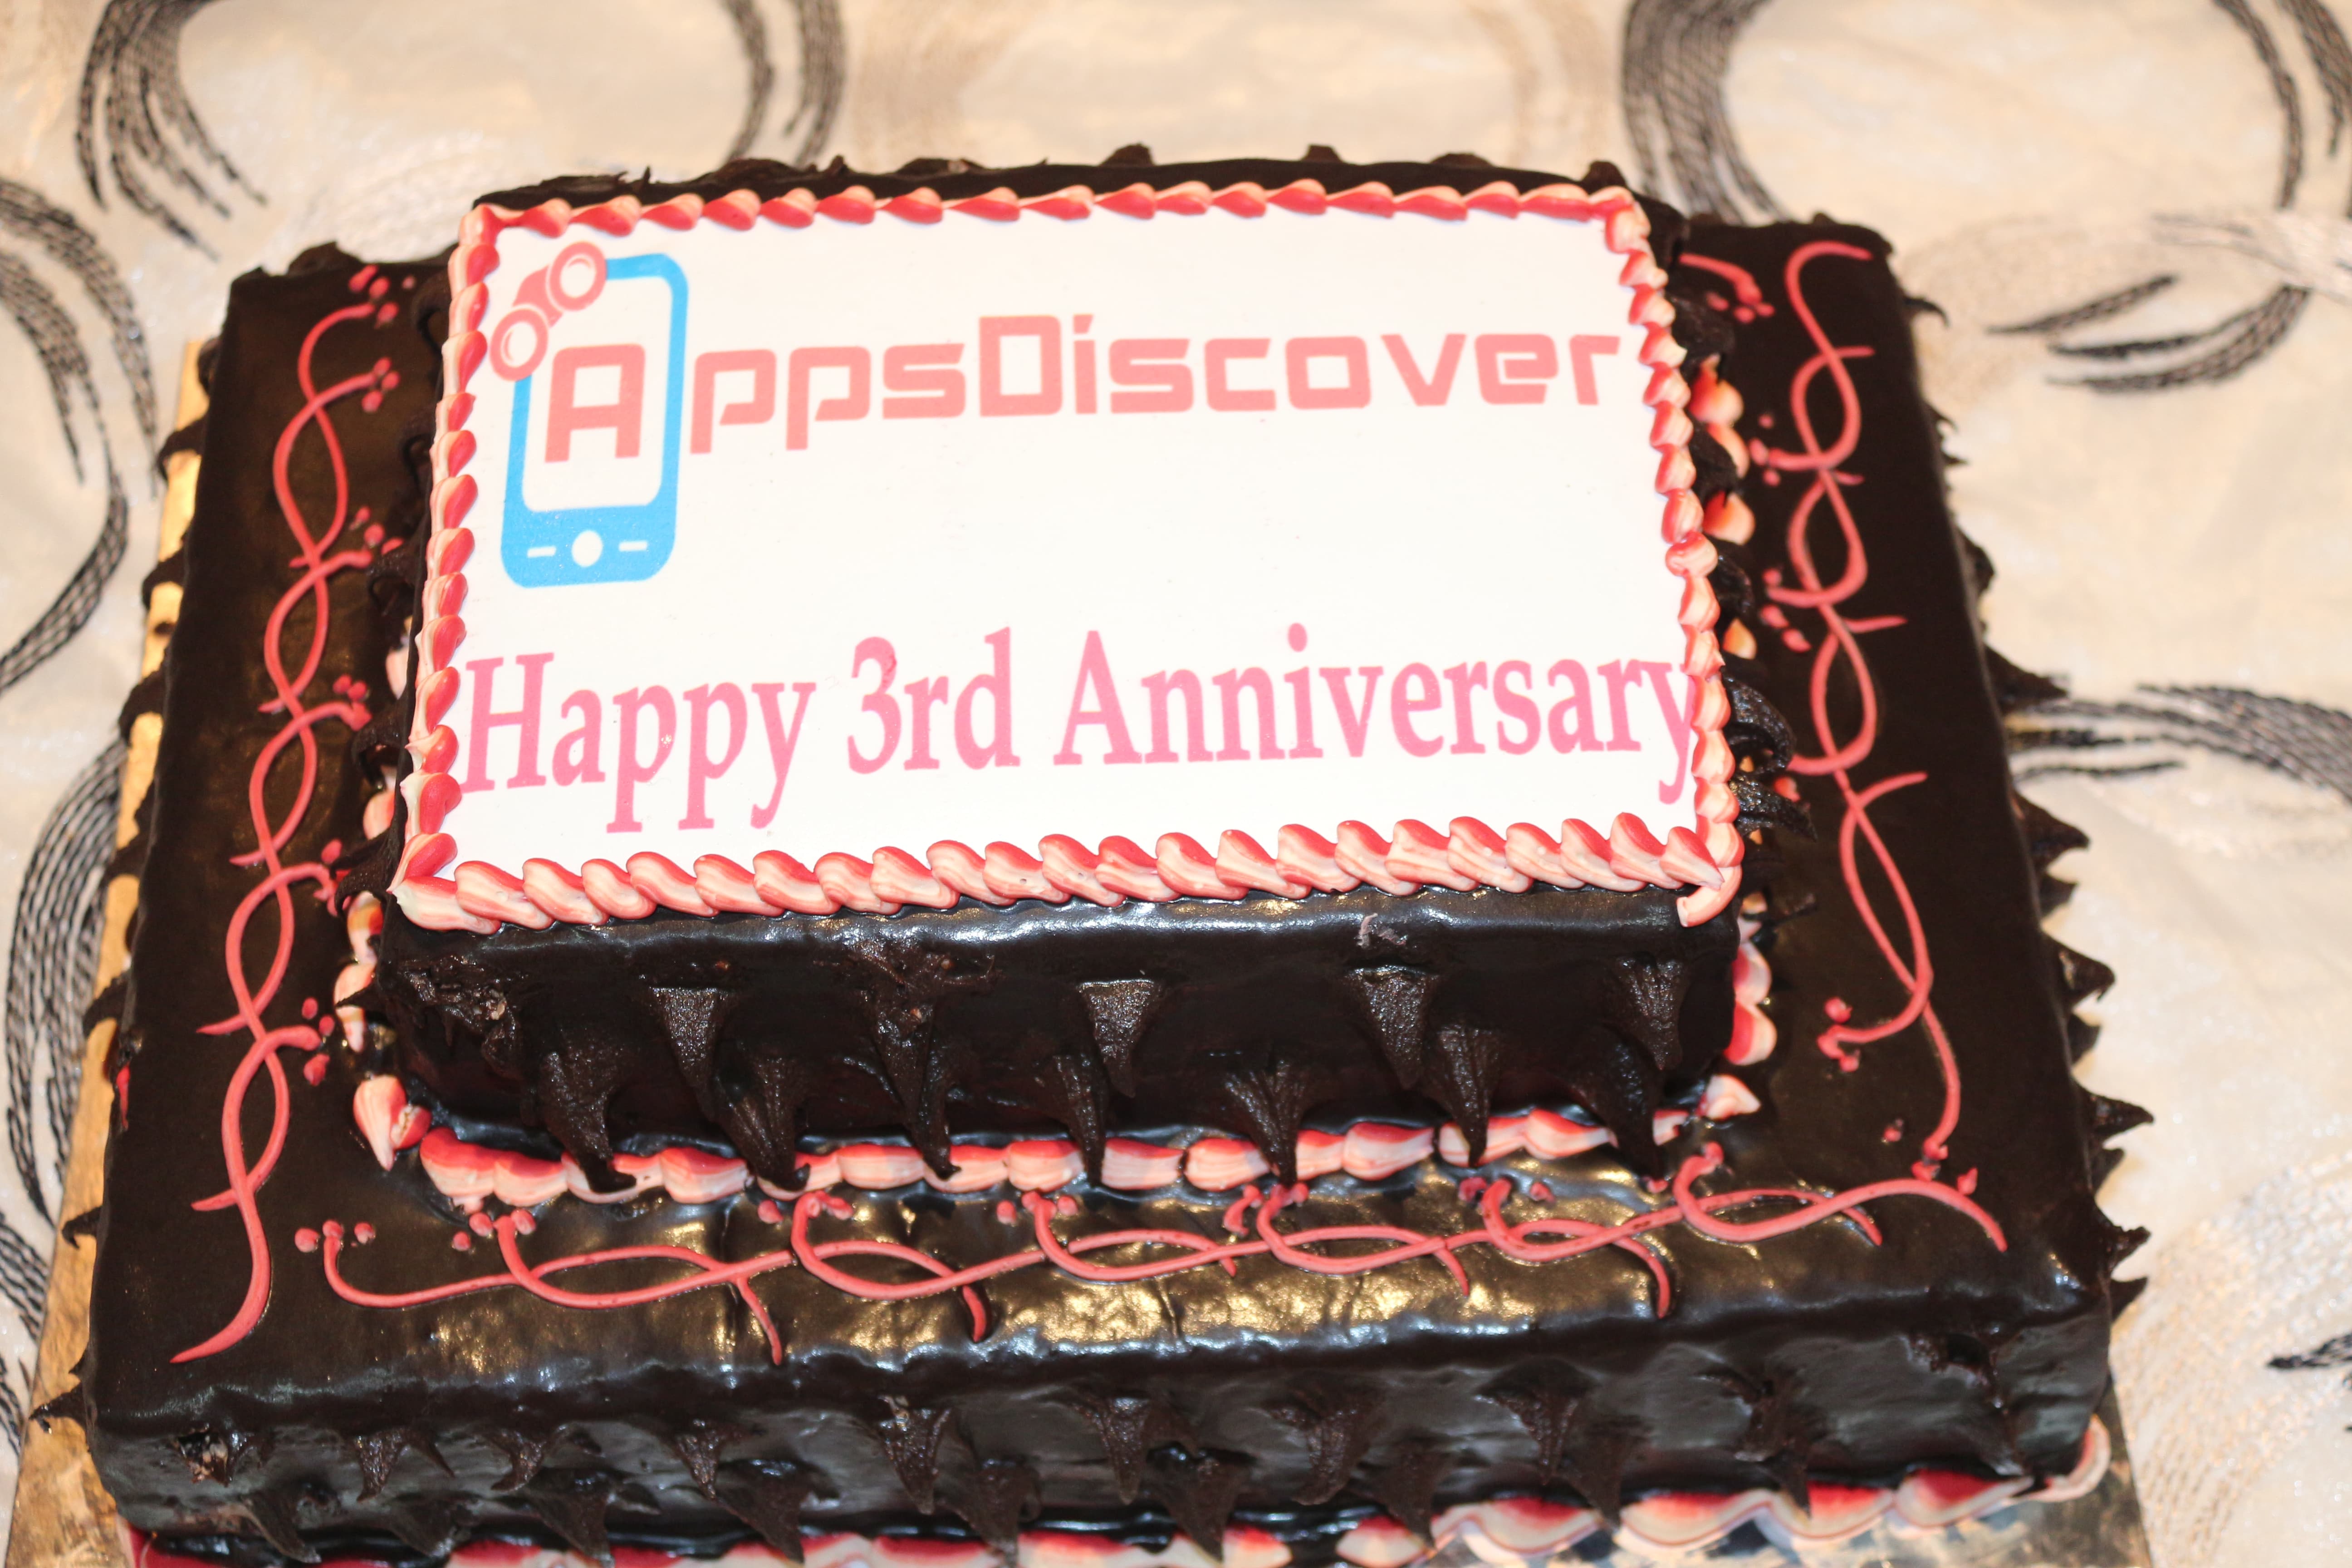 Apps Discover Anniversary Cake